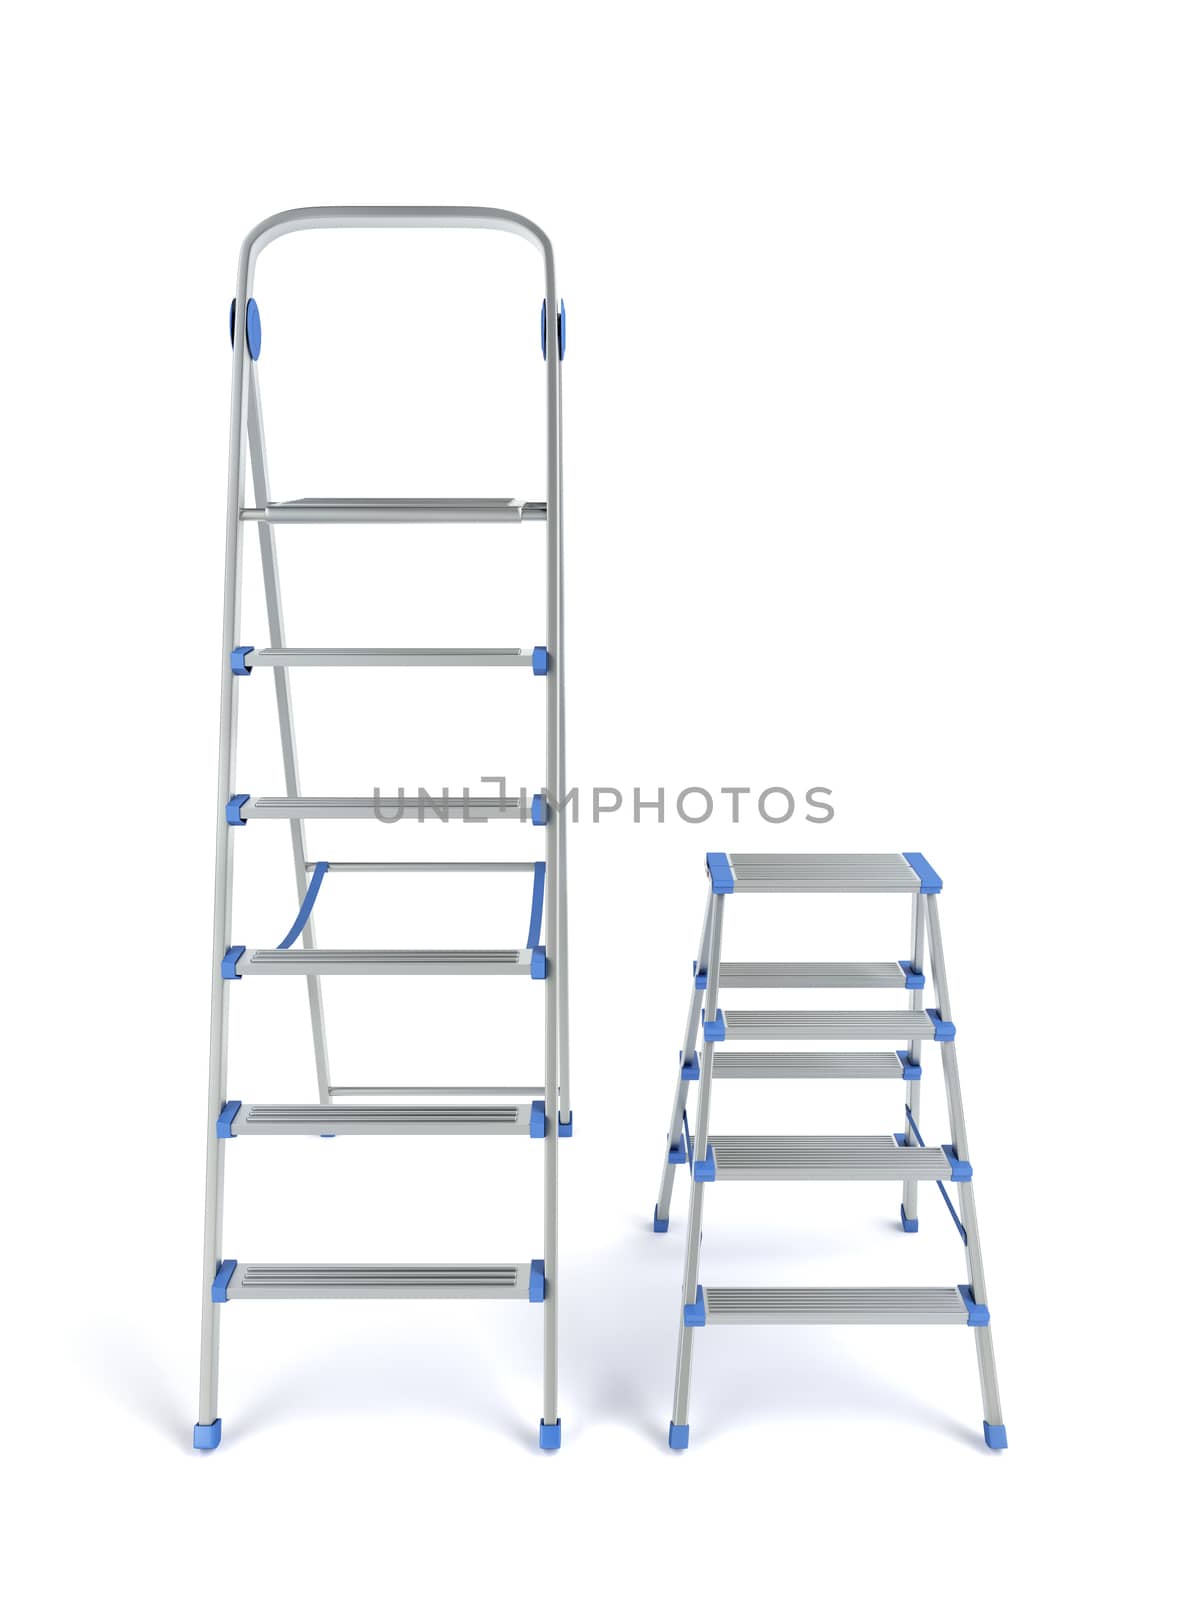 Two aluminum stepladders with different sizes on white background